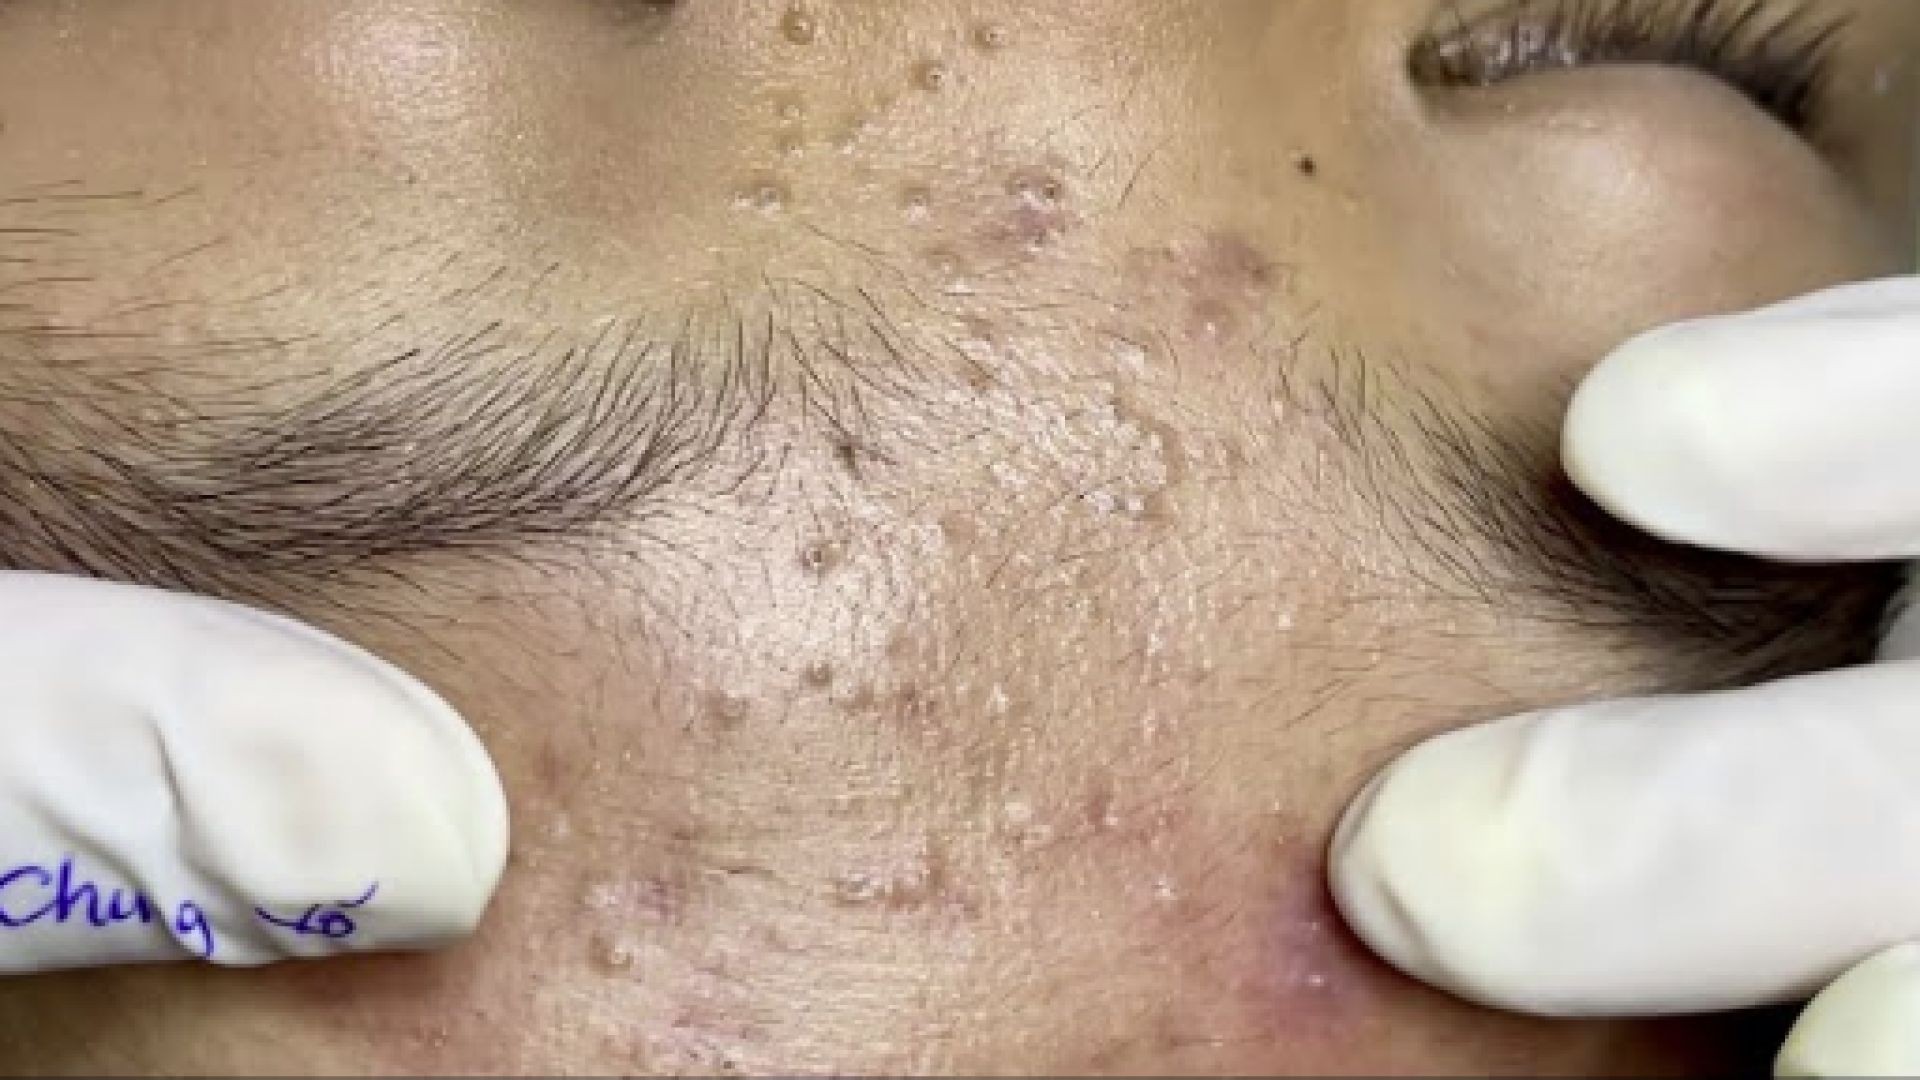 Satisfying video with Chung Vo Spa | 183